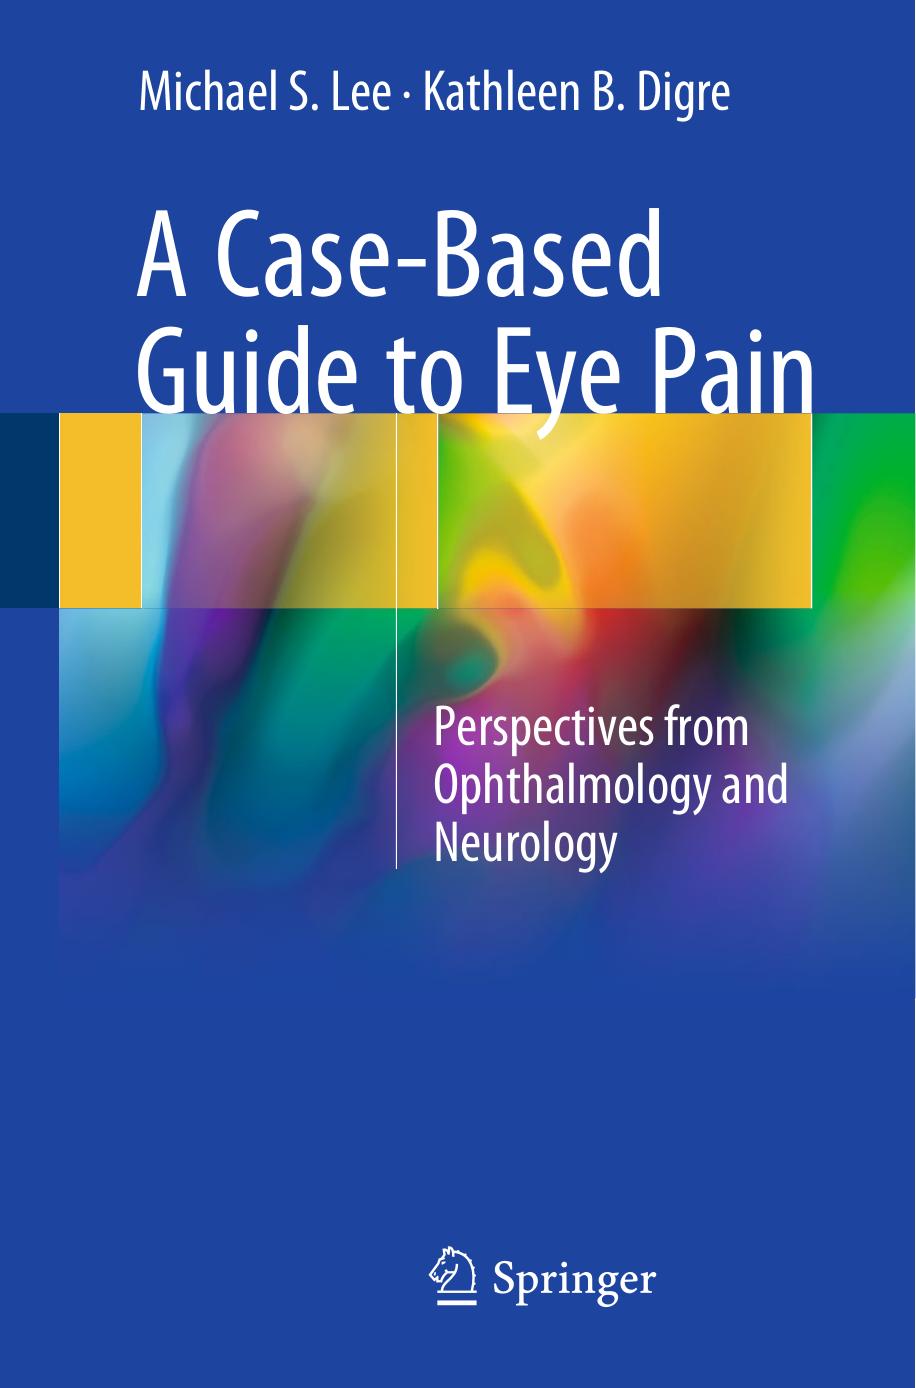 A Case-Based Guide to Eye Pain  Perspectives from Ophthalmology and Neurology 2018